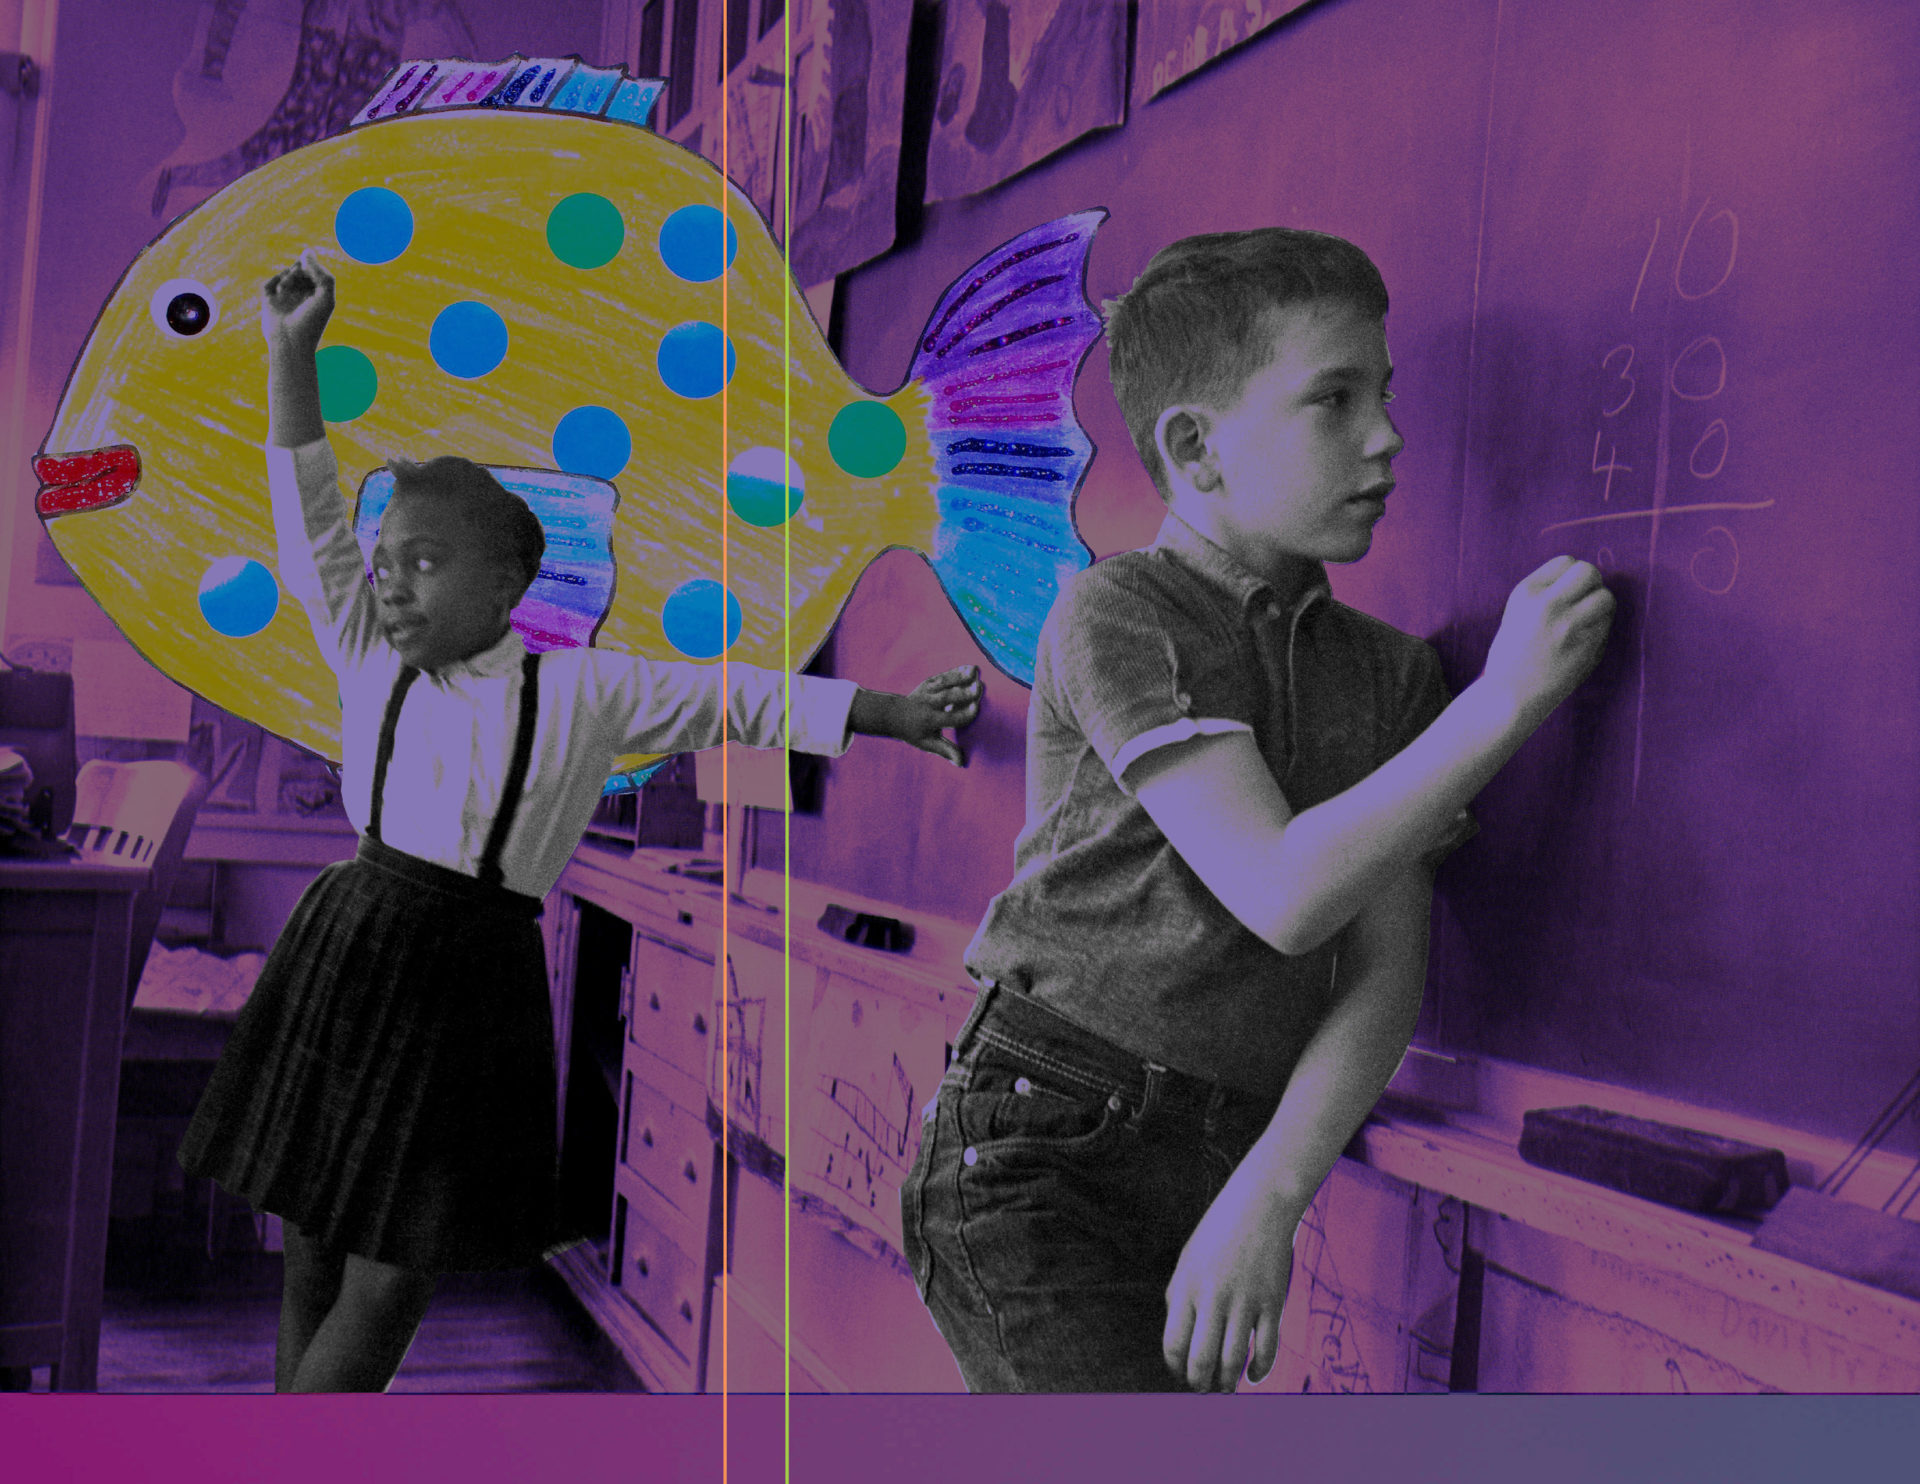 Students stand at the blackboard in a classroom flooded wtih color and dream images. Press image courtesy of the artist